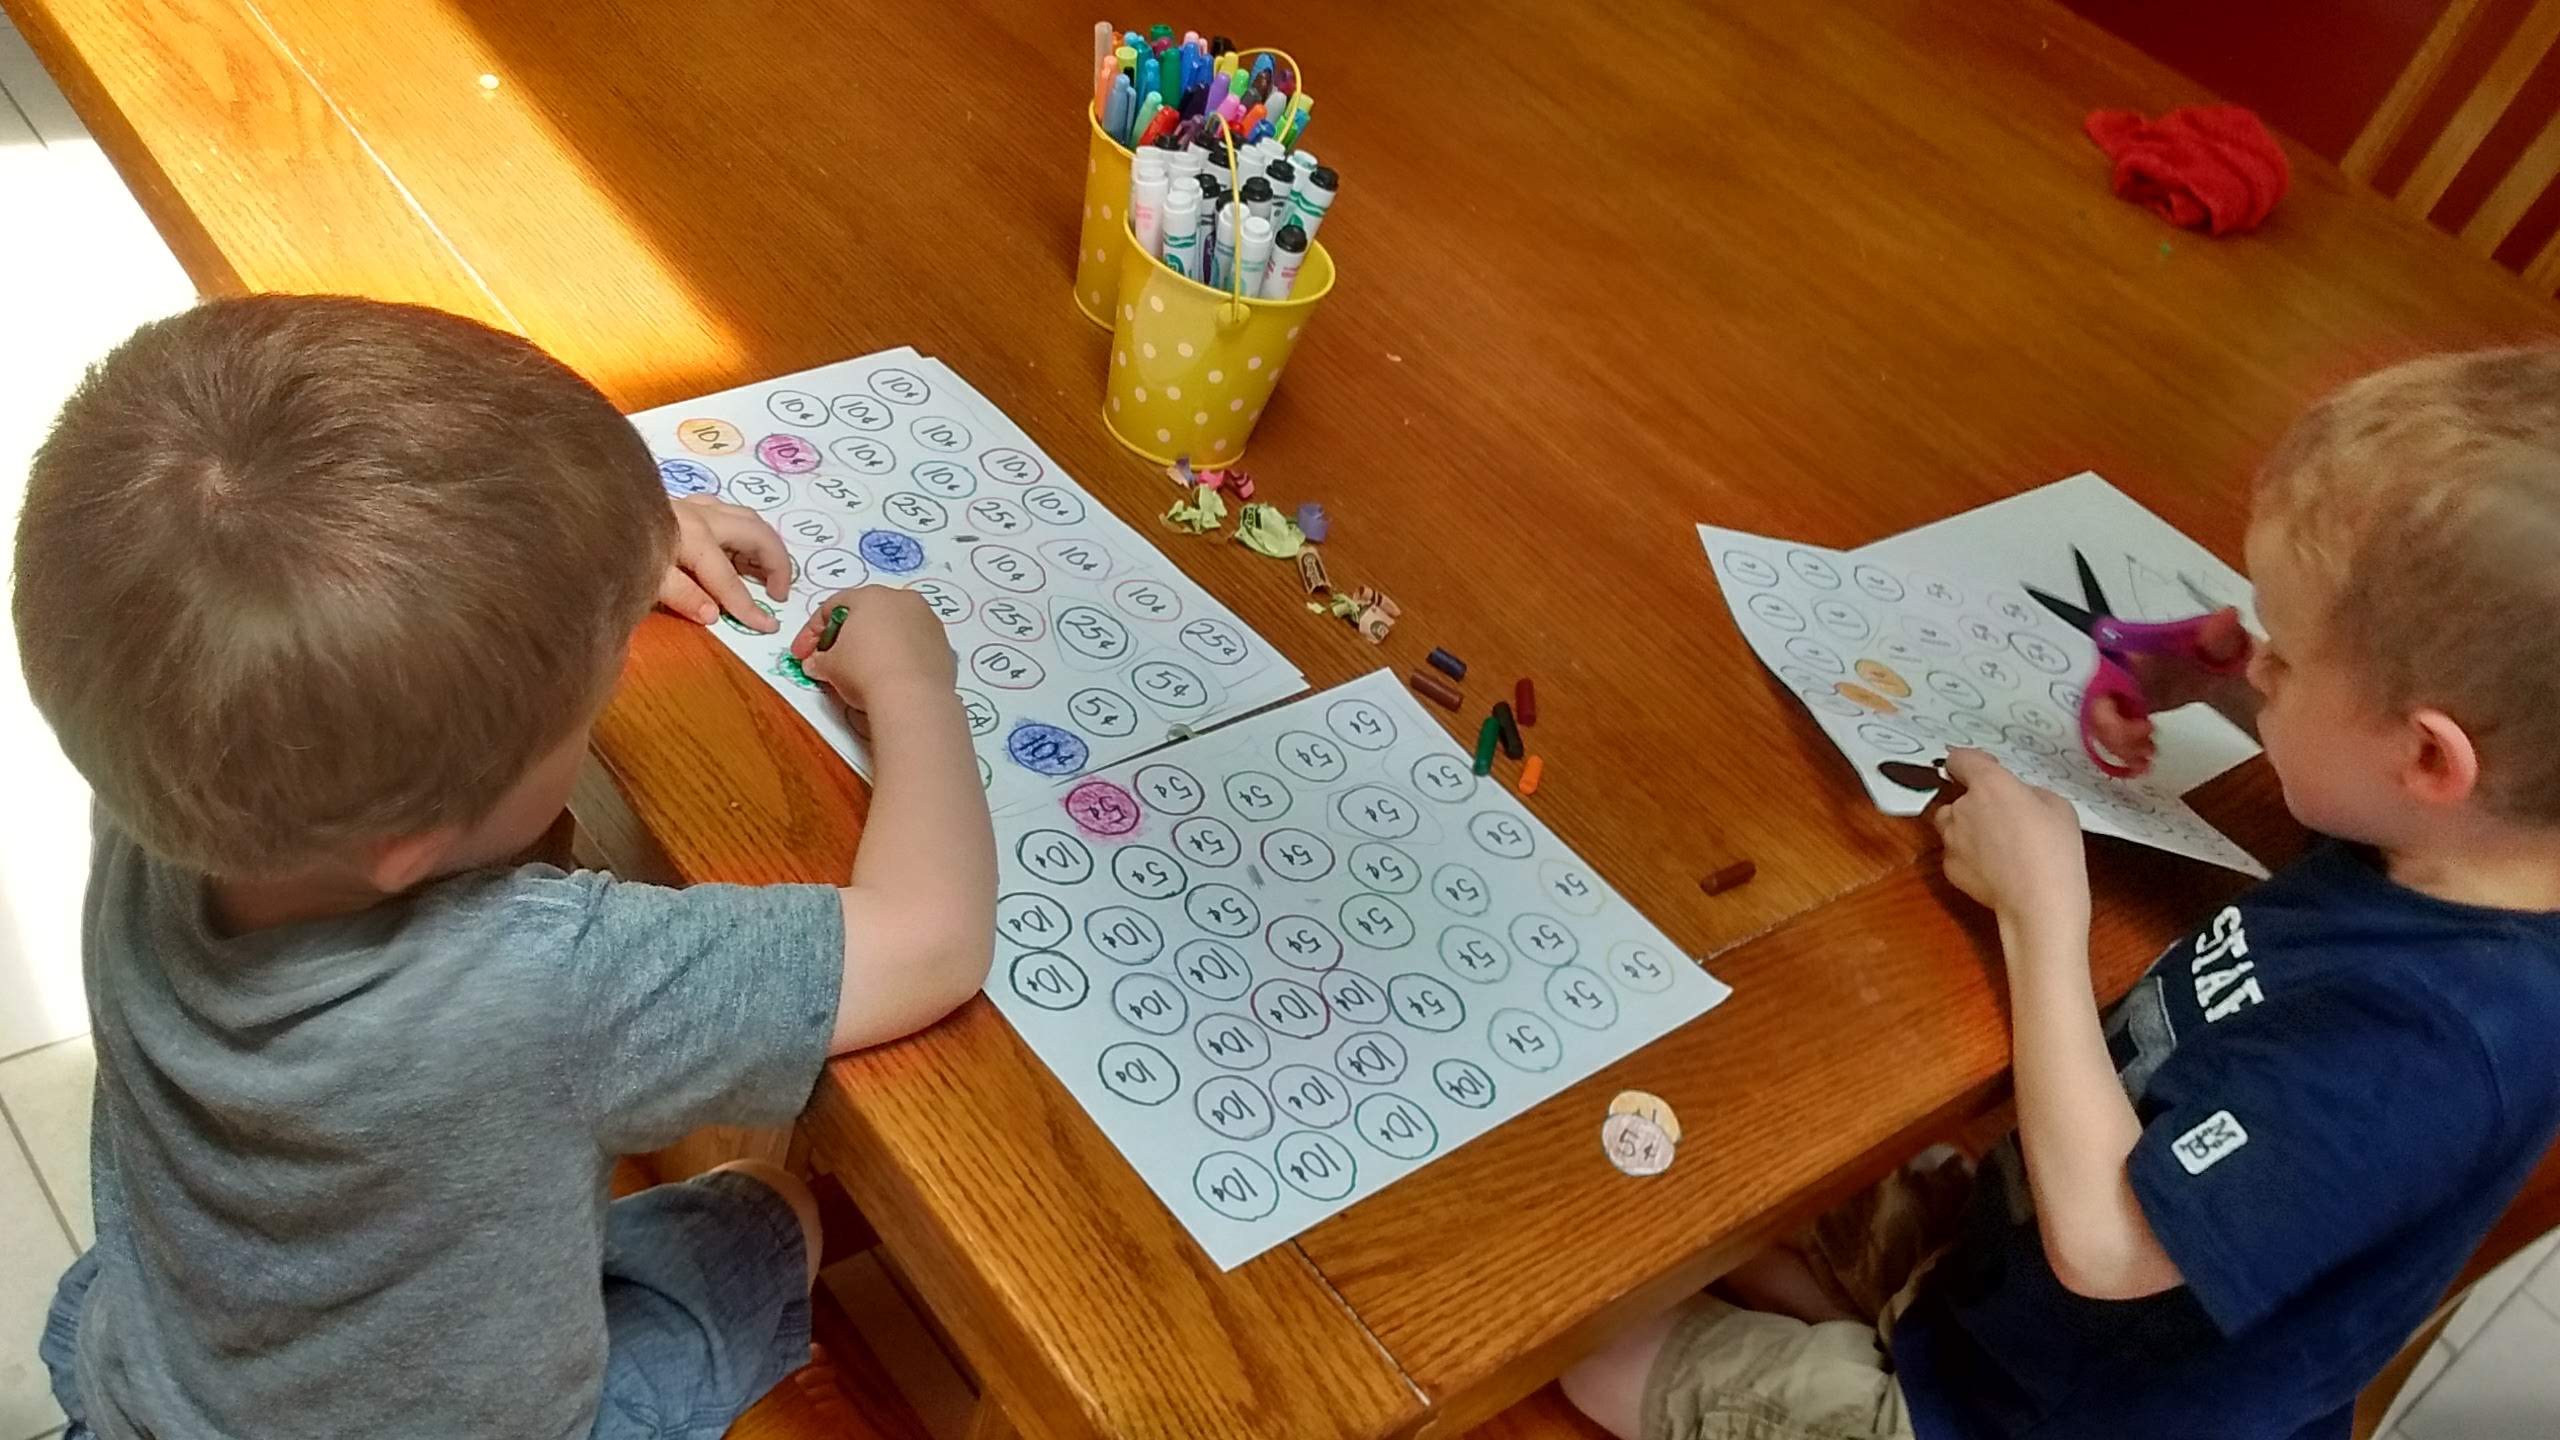 boys coloring paper coins with tiny broken crayons and cutting them out with scissors